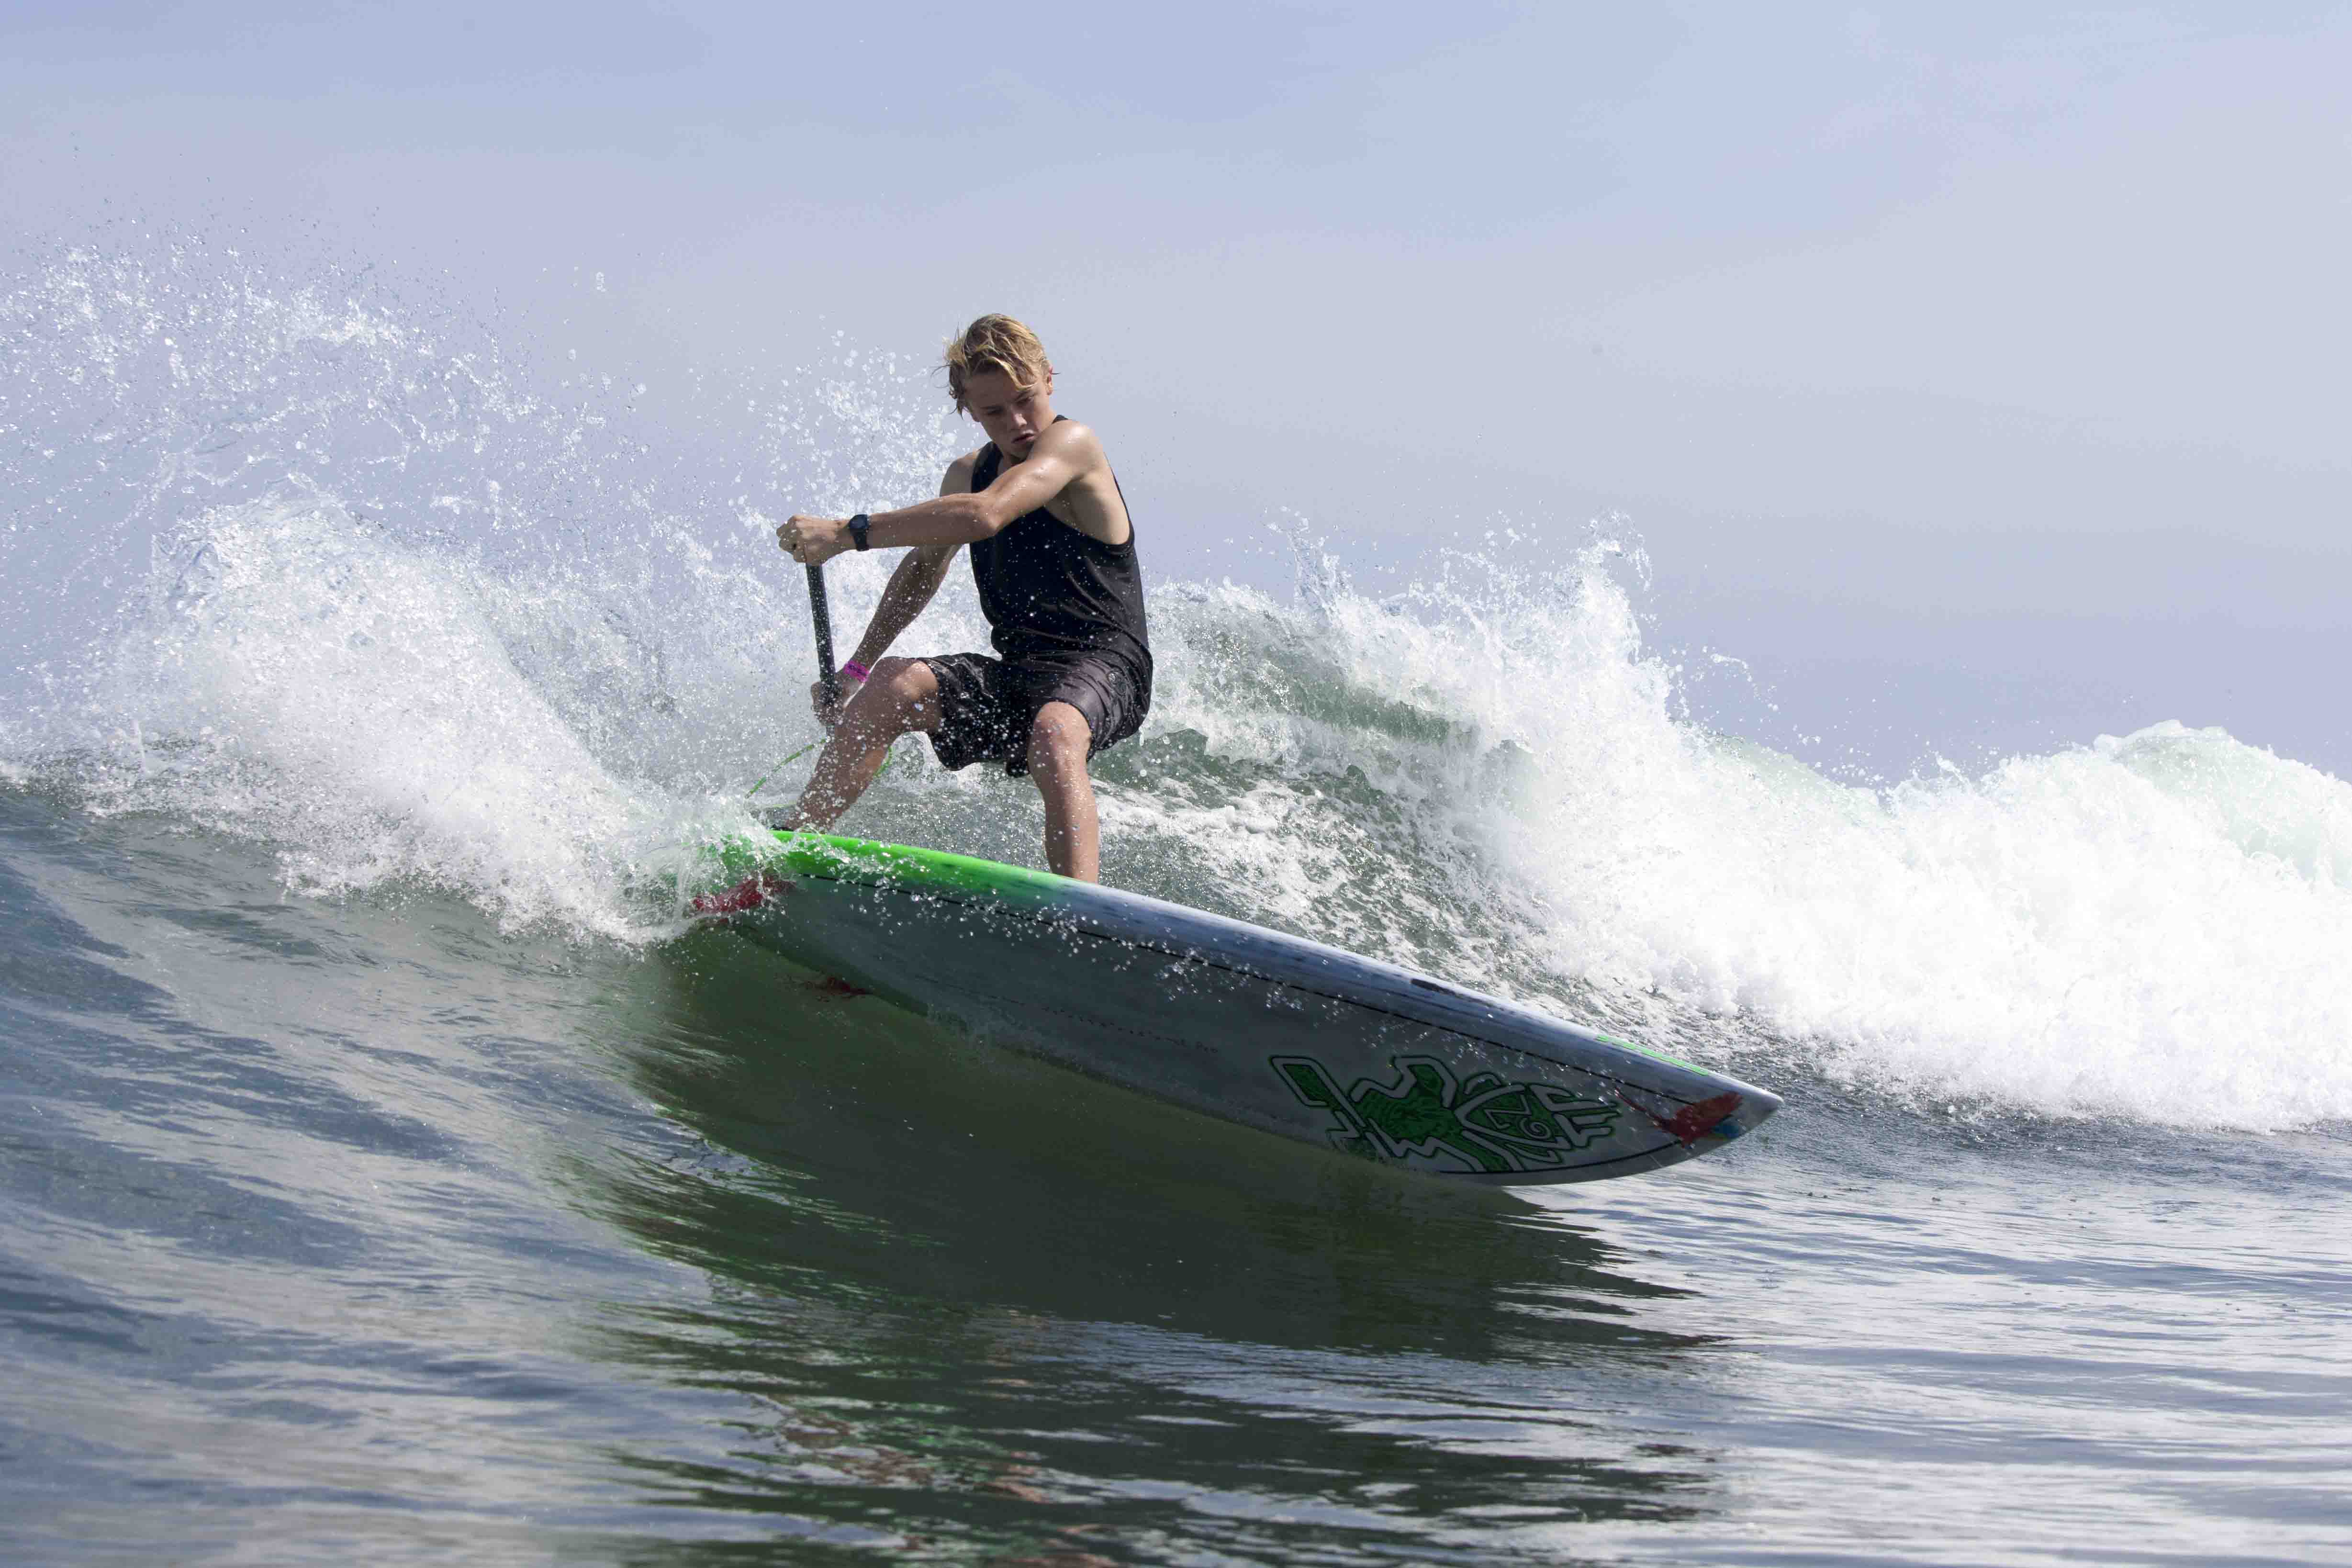 New Zealand’s Ollie Houghton warming up for the event at Sayulita’s reef break.  Photo: ISA/Brian Bielmann